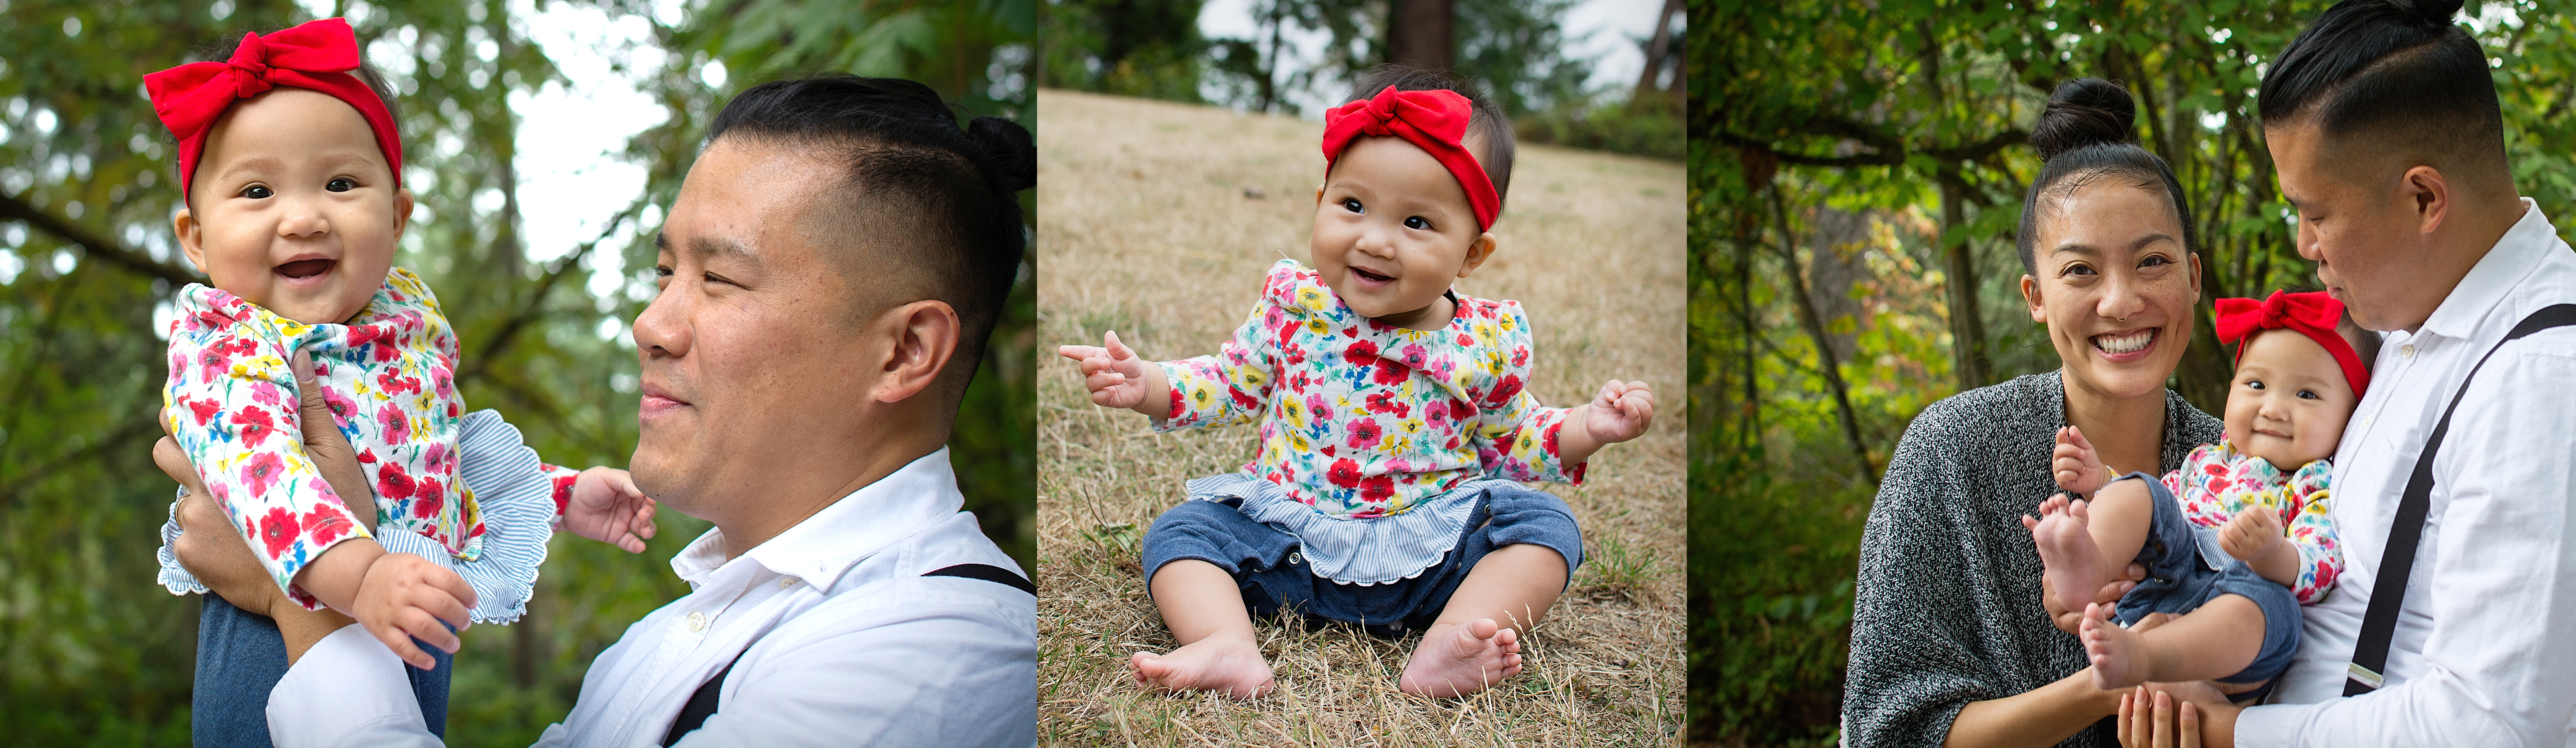 three pictures of a littel girl with her mom and dad and smiling on the grass